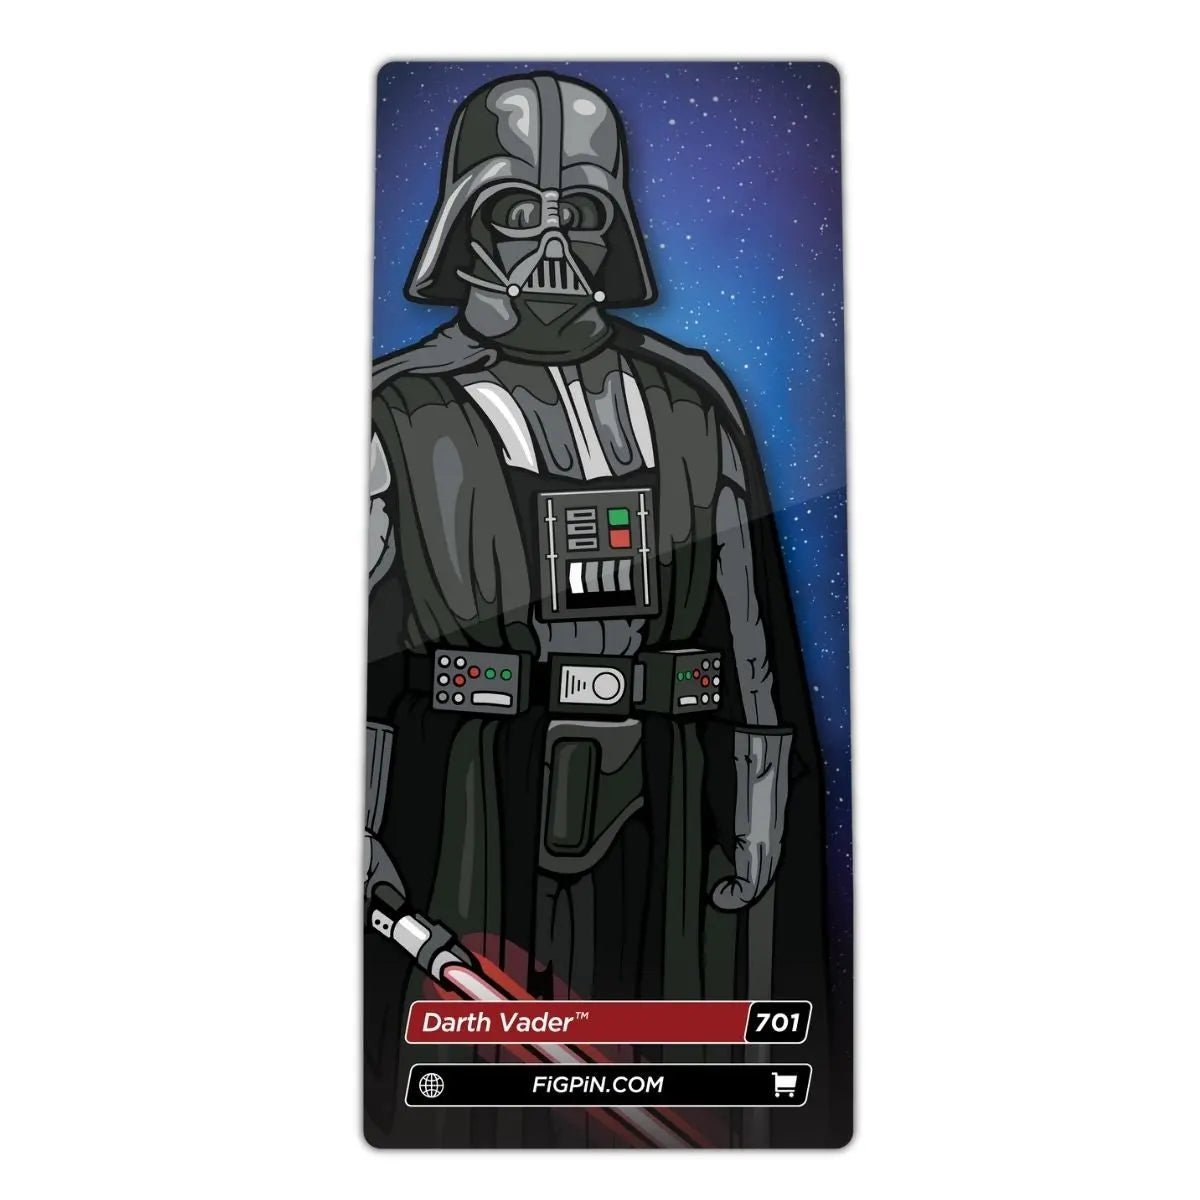 Star Wars: A New Hope Darth Vader FiGPiN 3-Inch Enamel Pin #701 - Simon's Collectibles